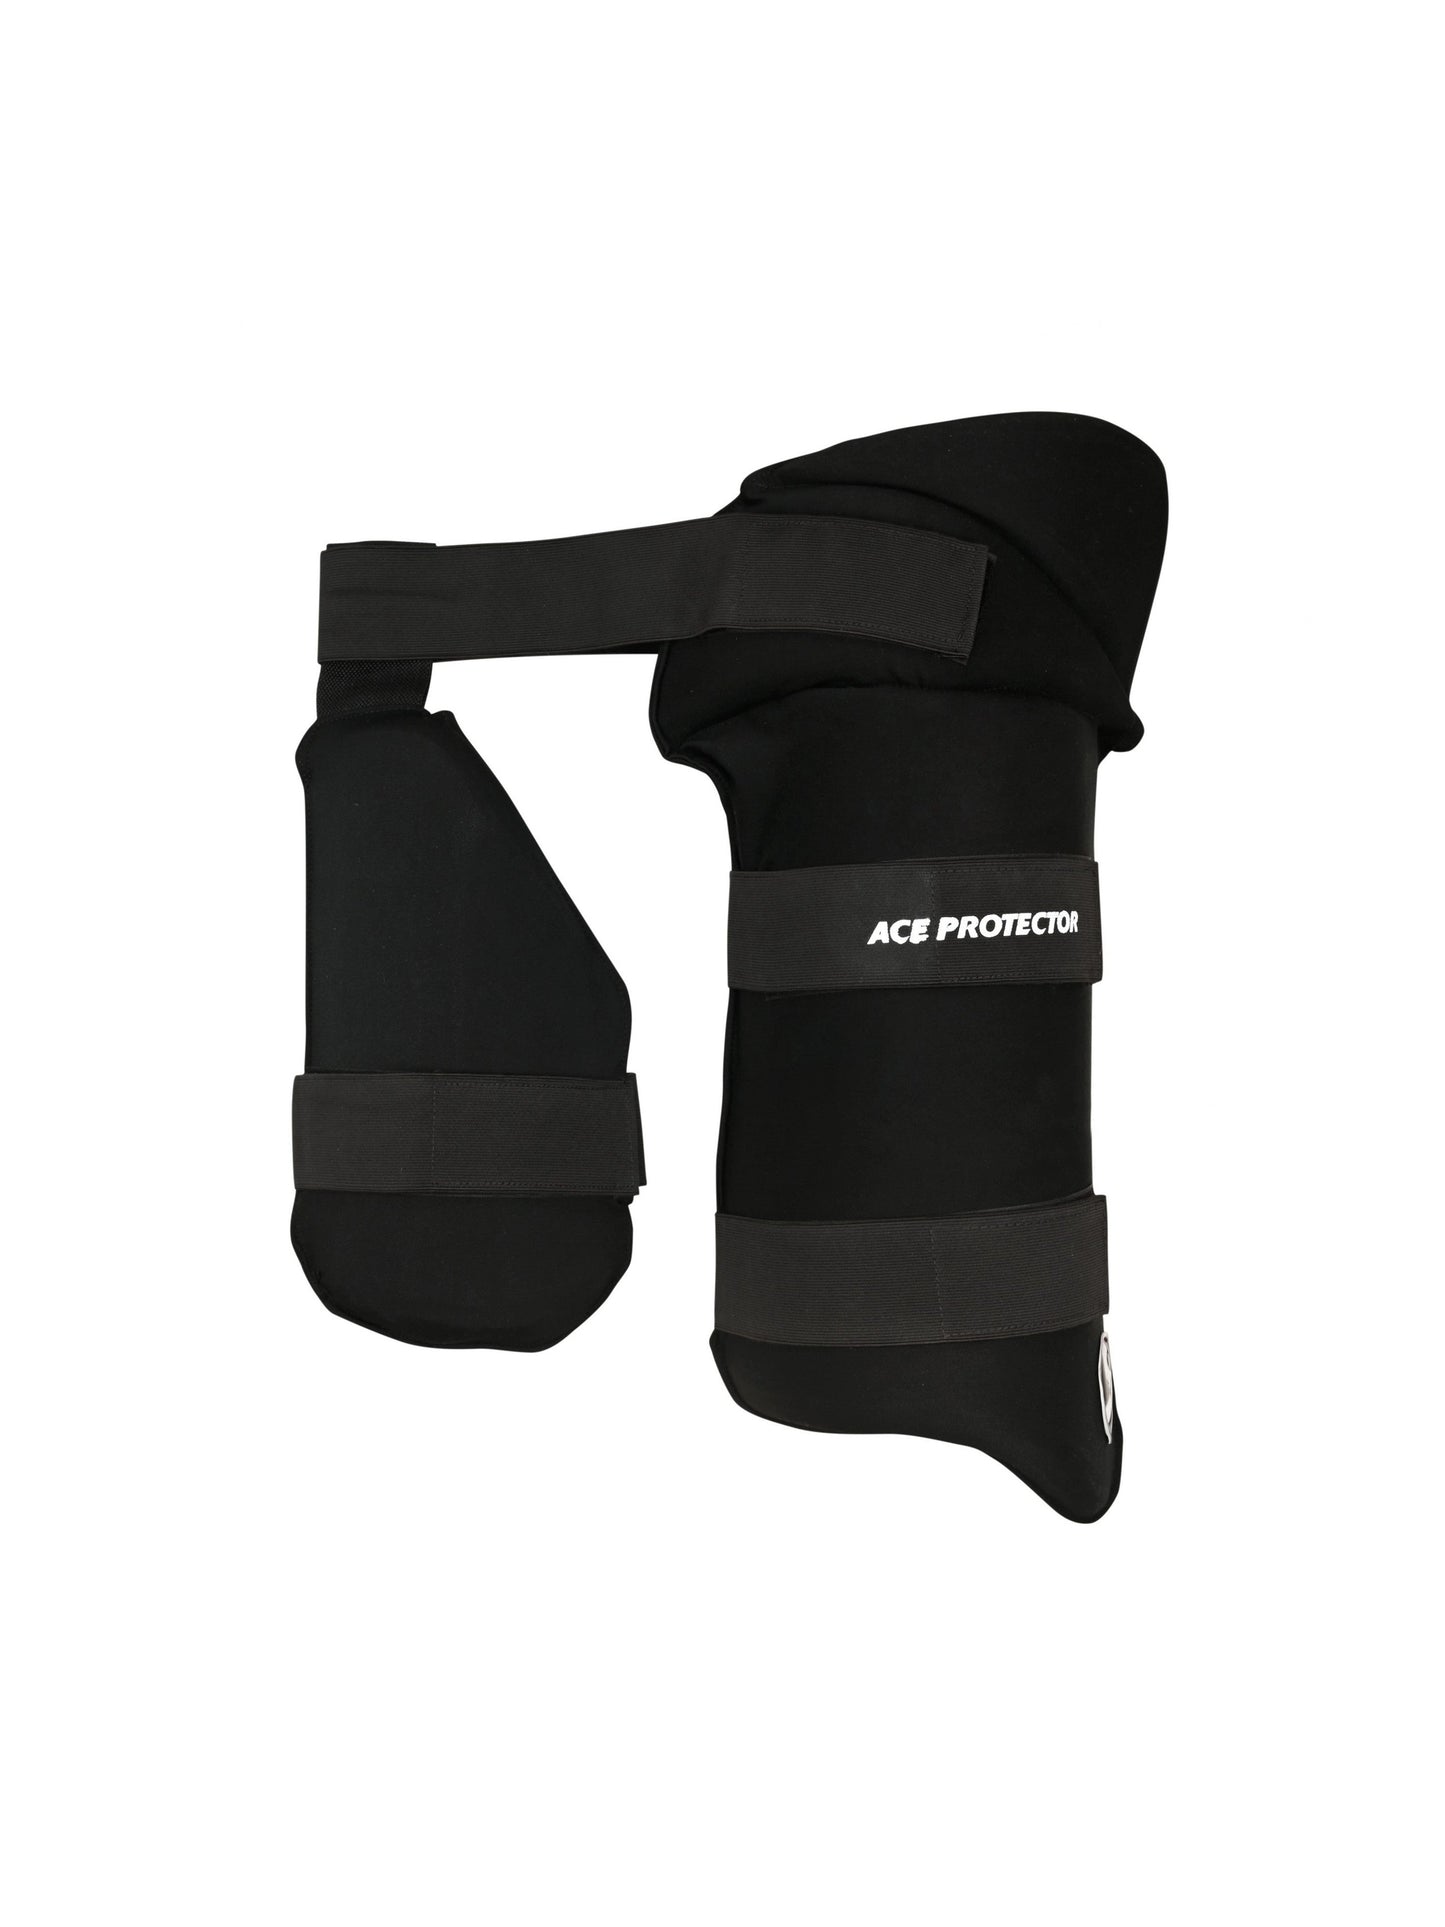 SG Combo Ace Protector Combo Thigh Pad (Black)